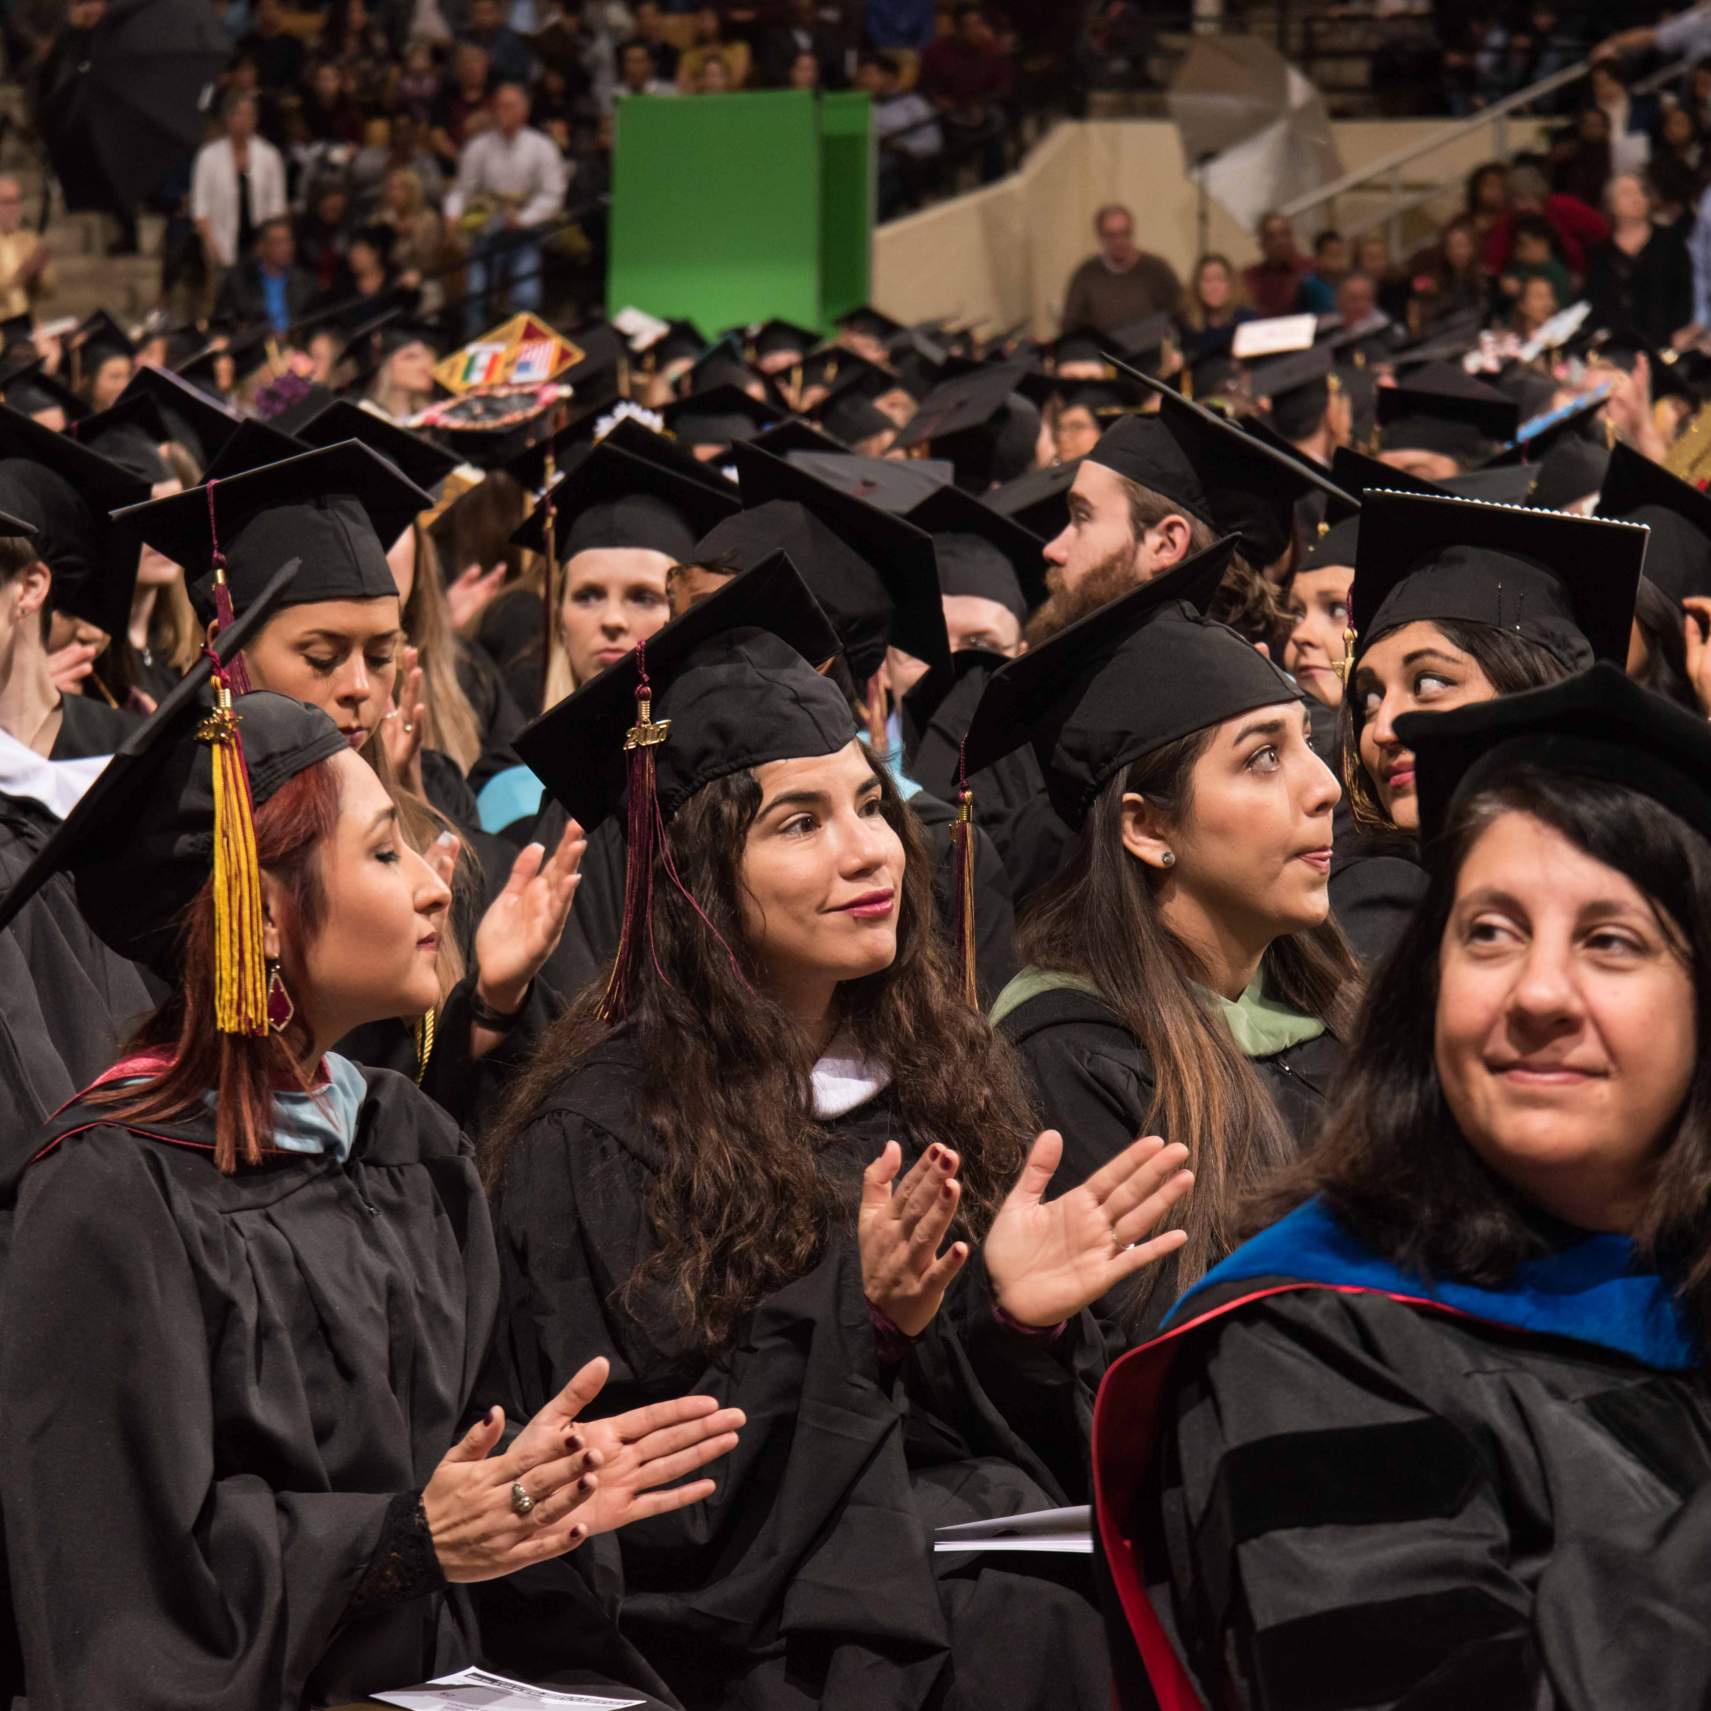 Graduates clapping during the ceremony.